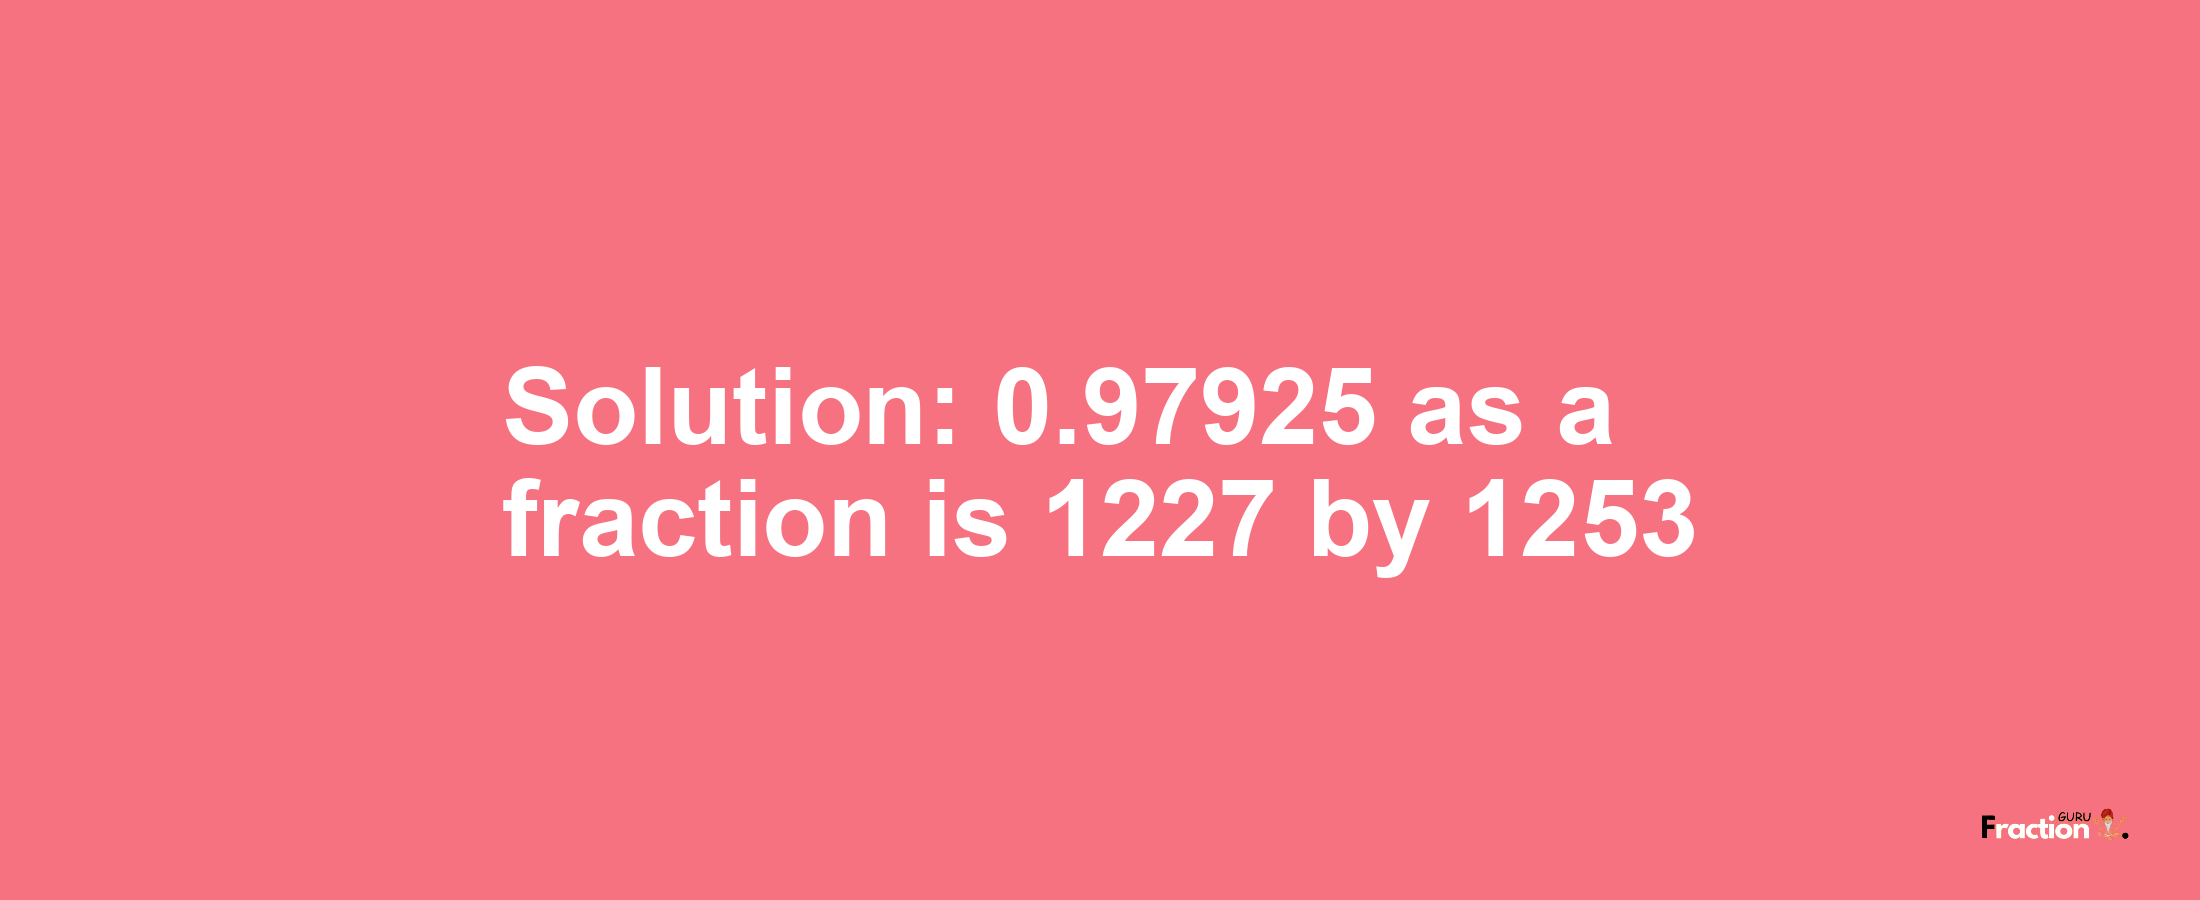 Solution:0.97925 as a fraction is 1227/1253